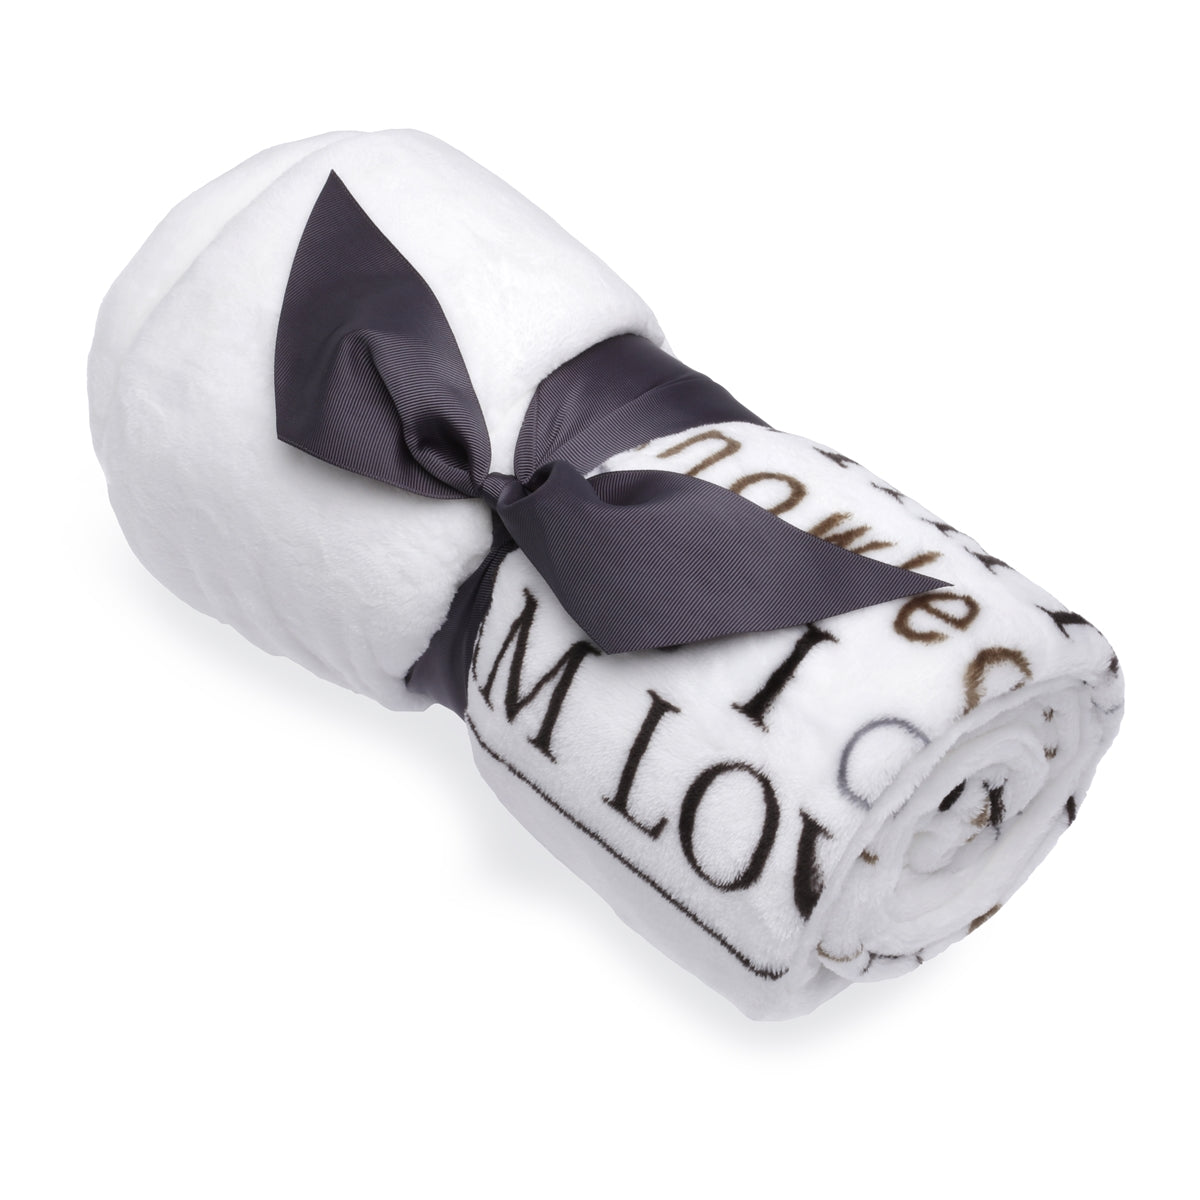 Child of God Blanket rolled and tied with a gray grosgrain ribbon.